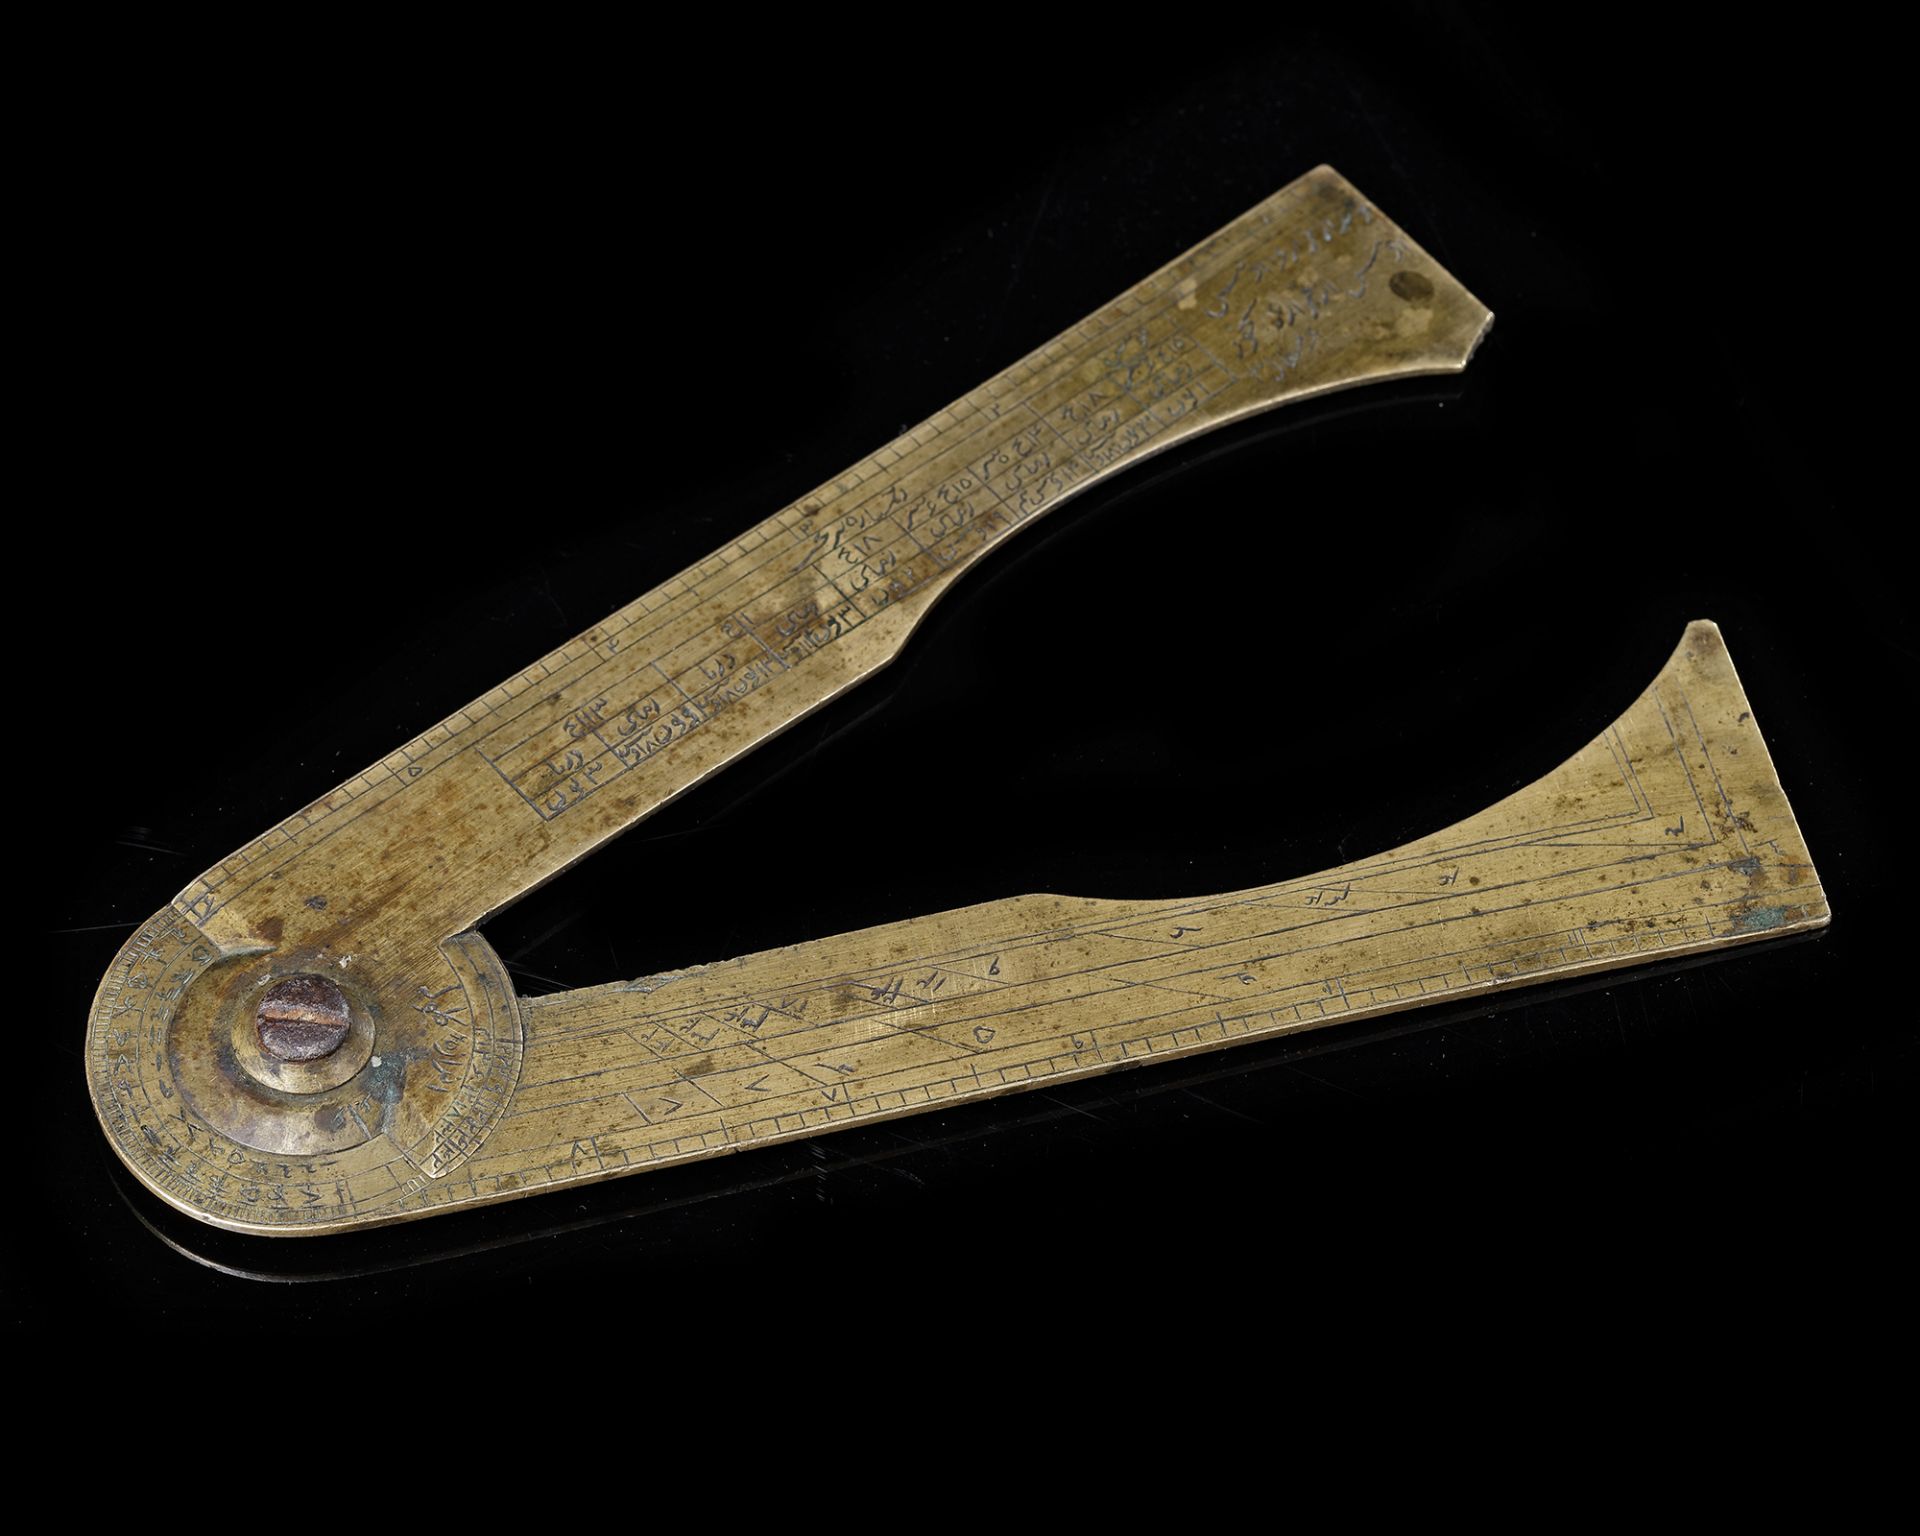 A RARE PERSIAN GUNNER’S CALIPER PRODUCED FOR THE PERSIAN ARMY, DATED 1154 AH/1741-42 AD